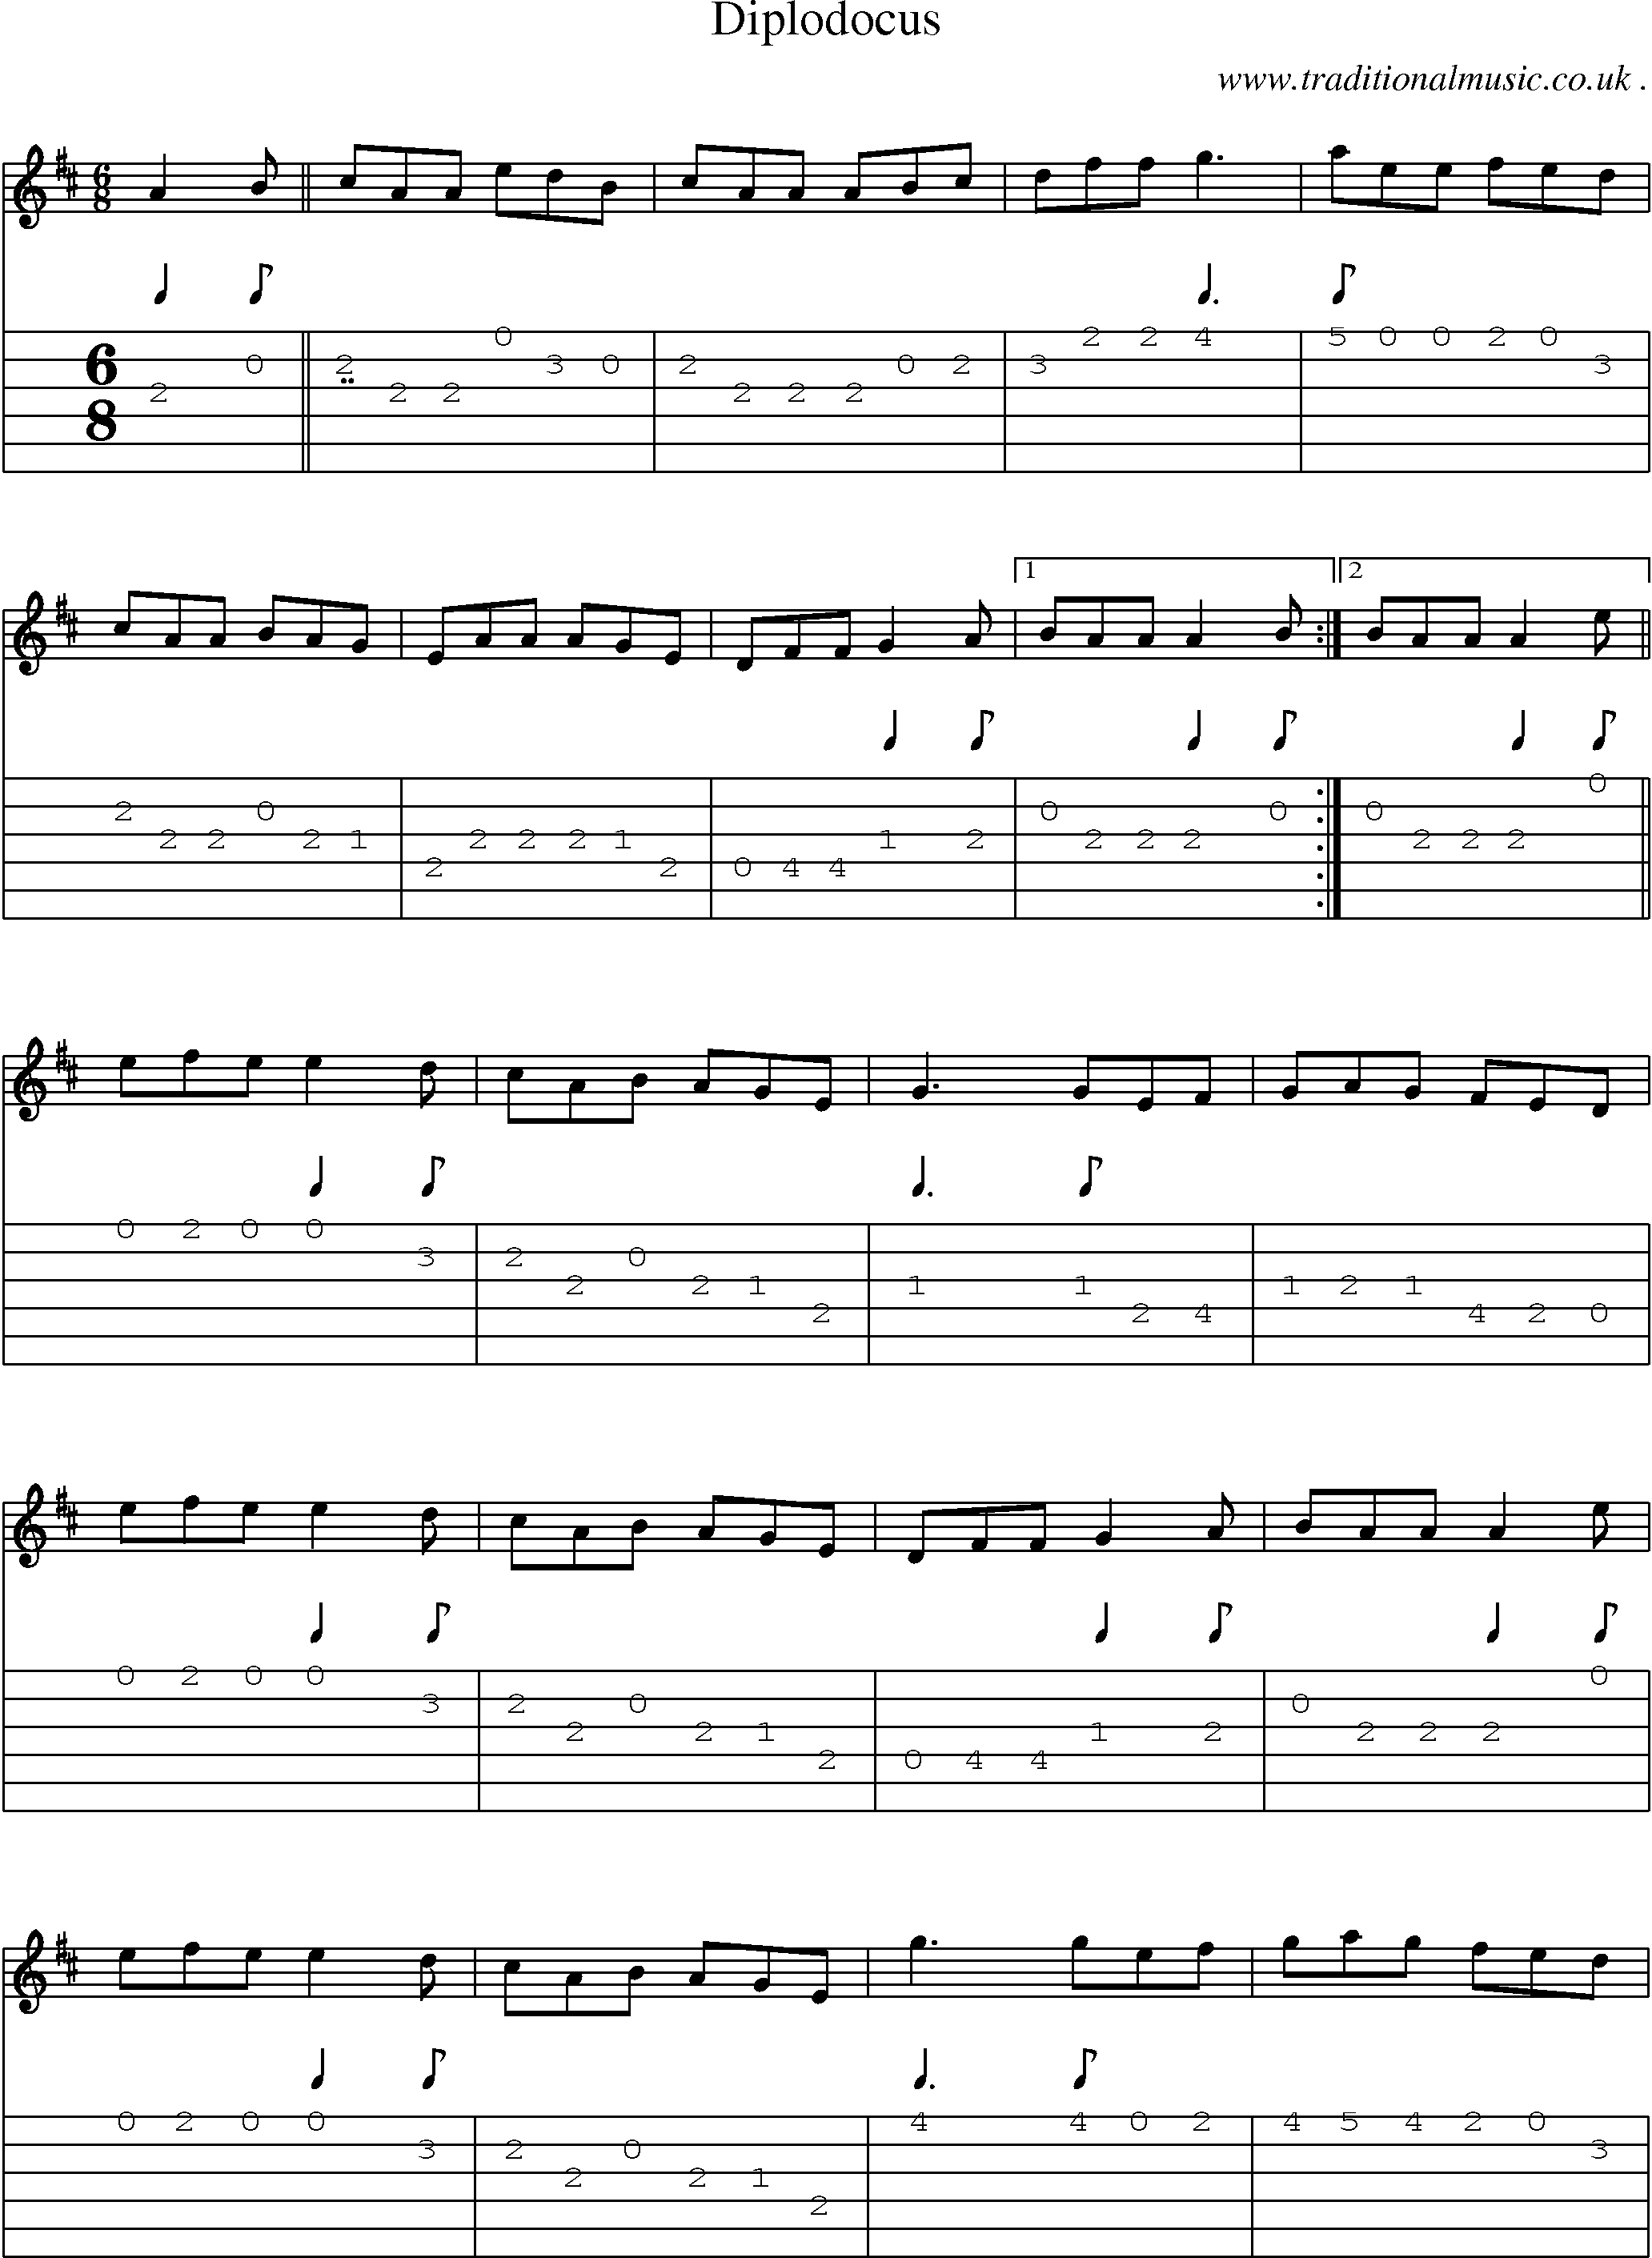 Sheet-Music and Guitar Tabs for Diplodocus